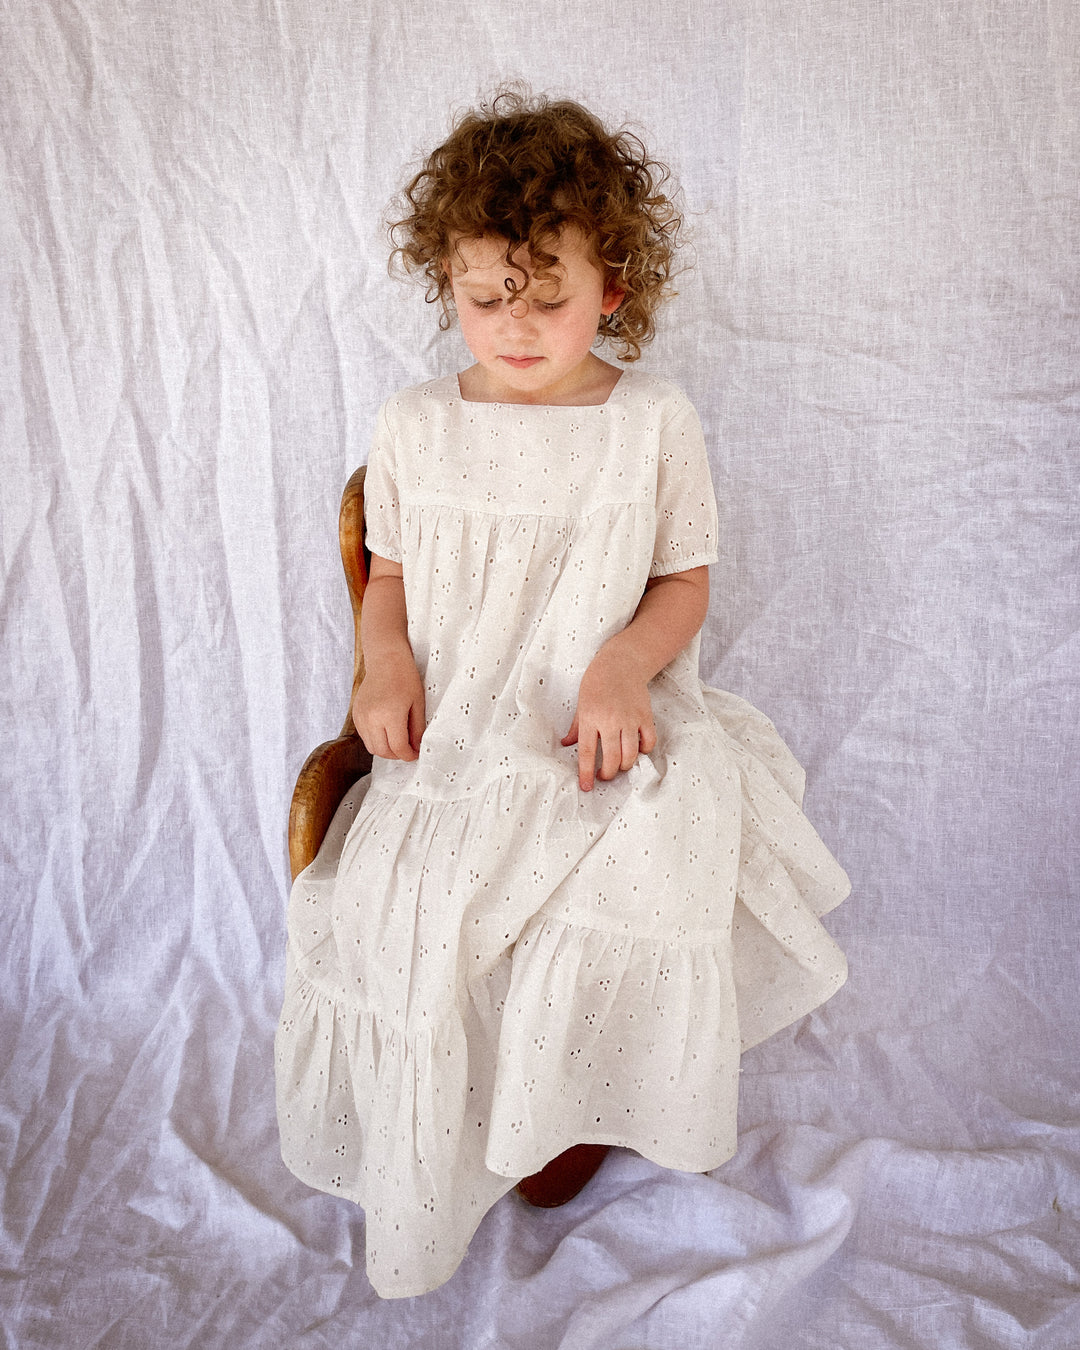 Organic Cotton Broderie Anglaise Vintage Inspired Dress